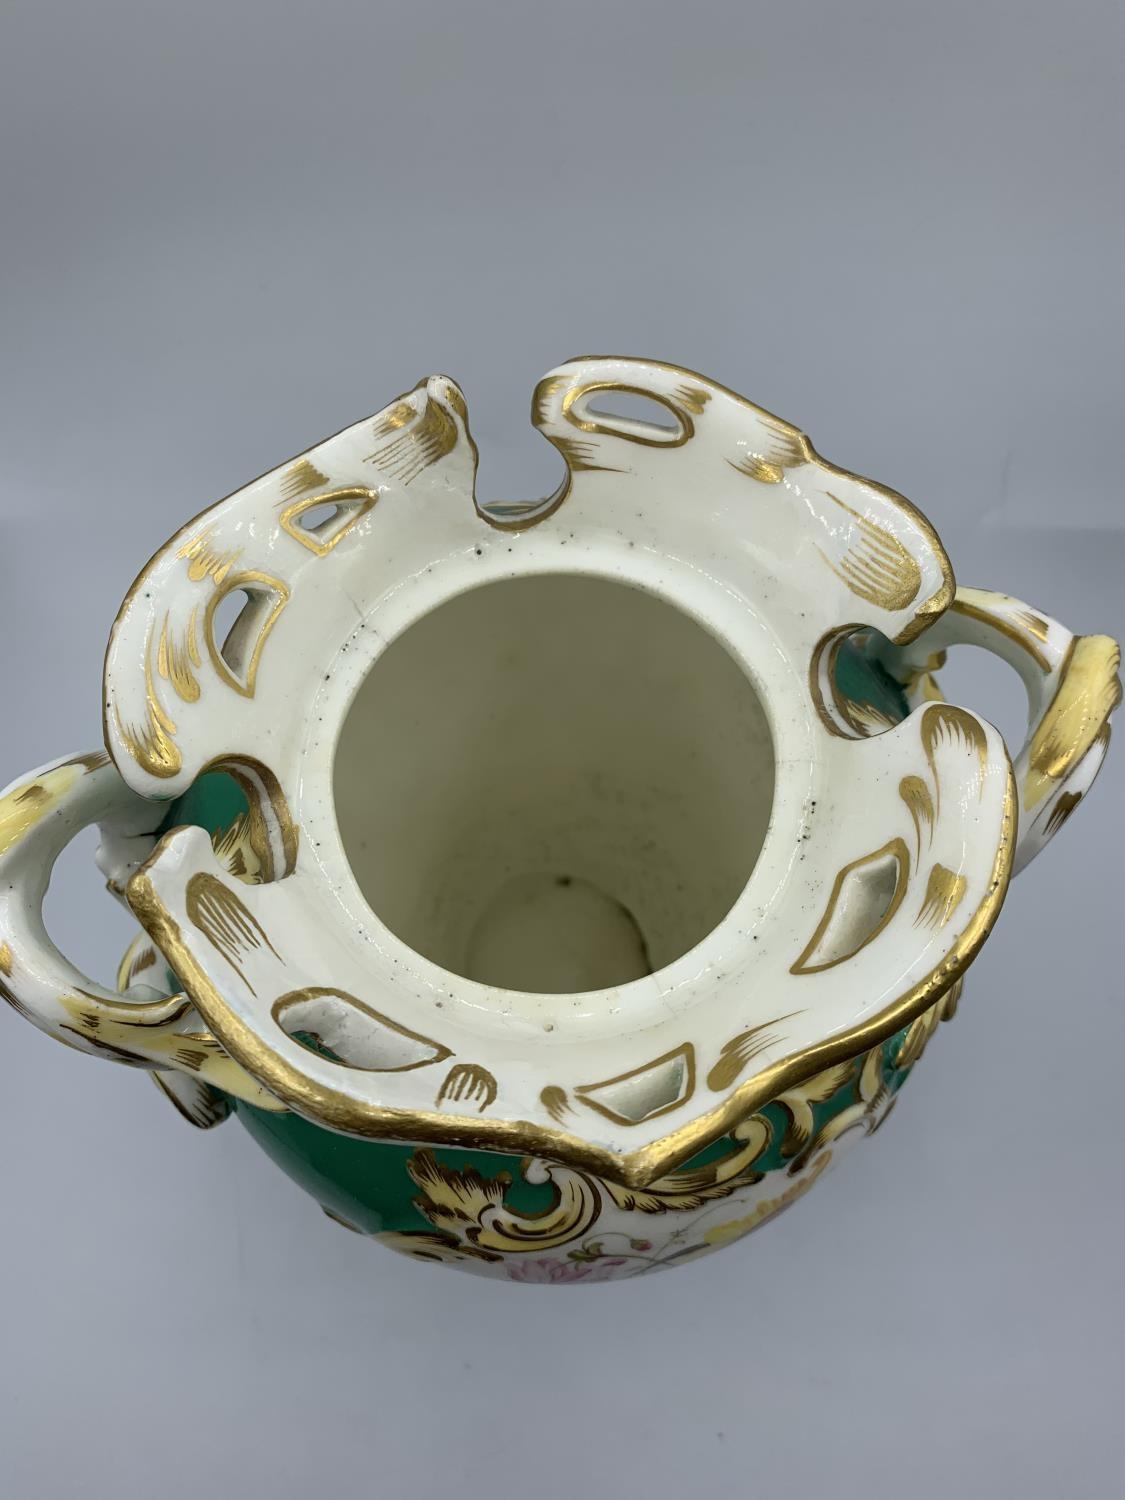 Green Baroque style Vase with Floral print and handles, circa 1880, 23cm tall - Image 5 of 7